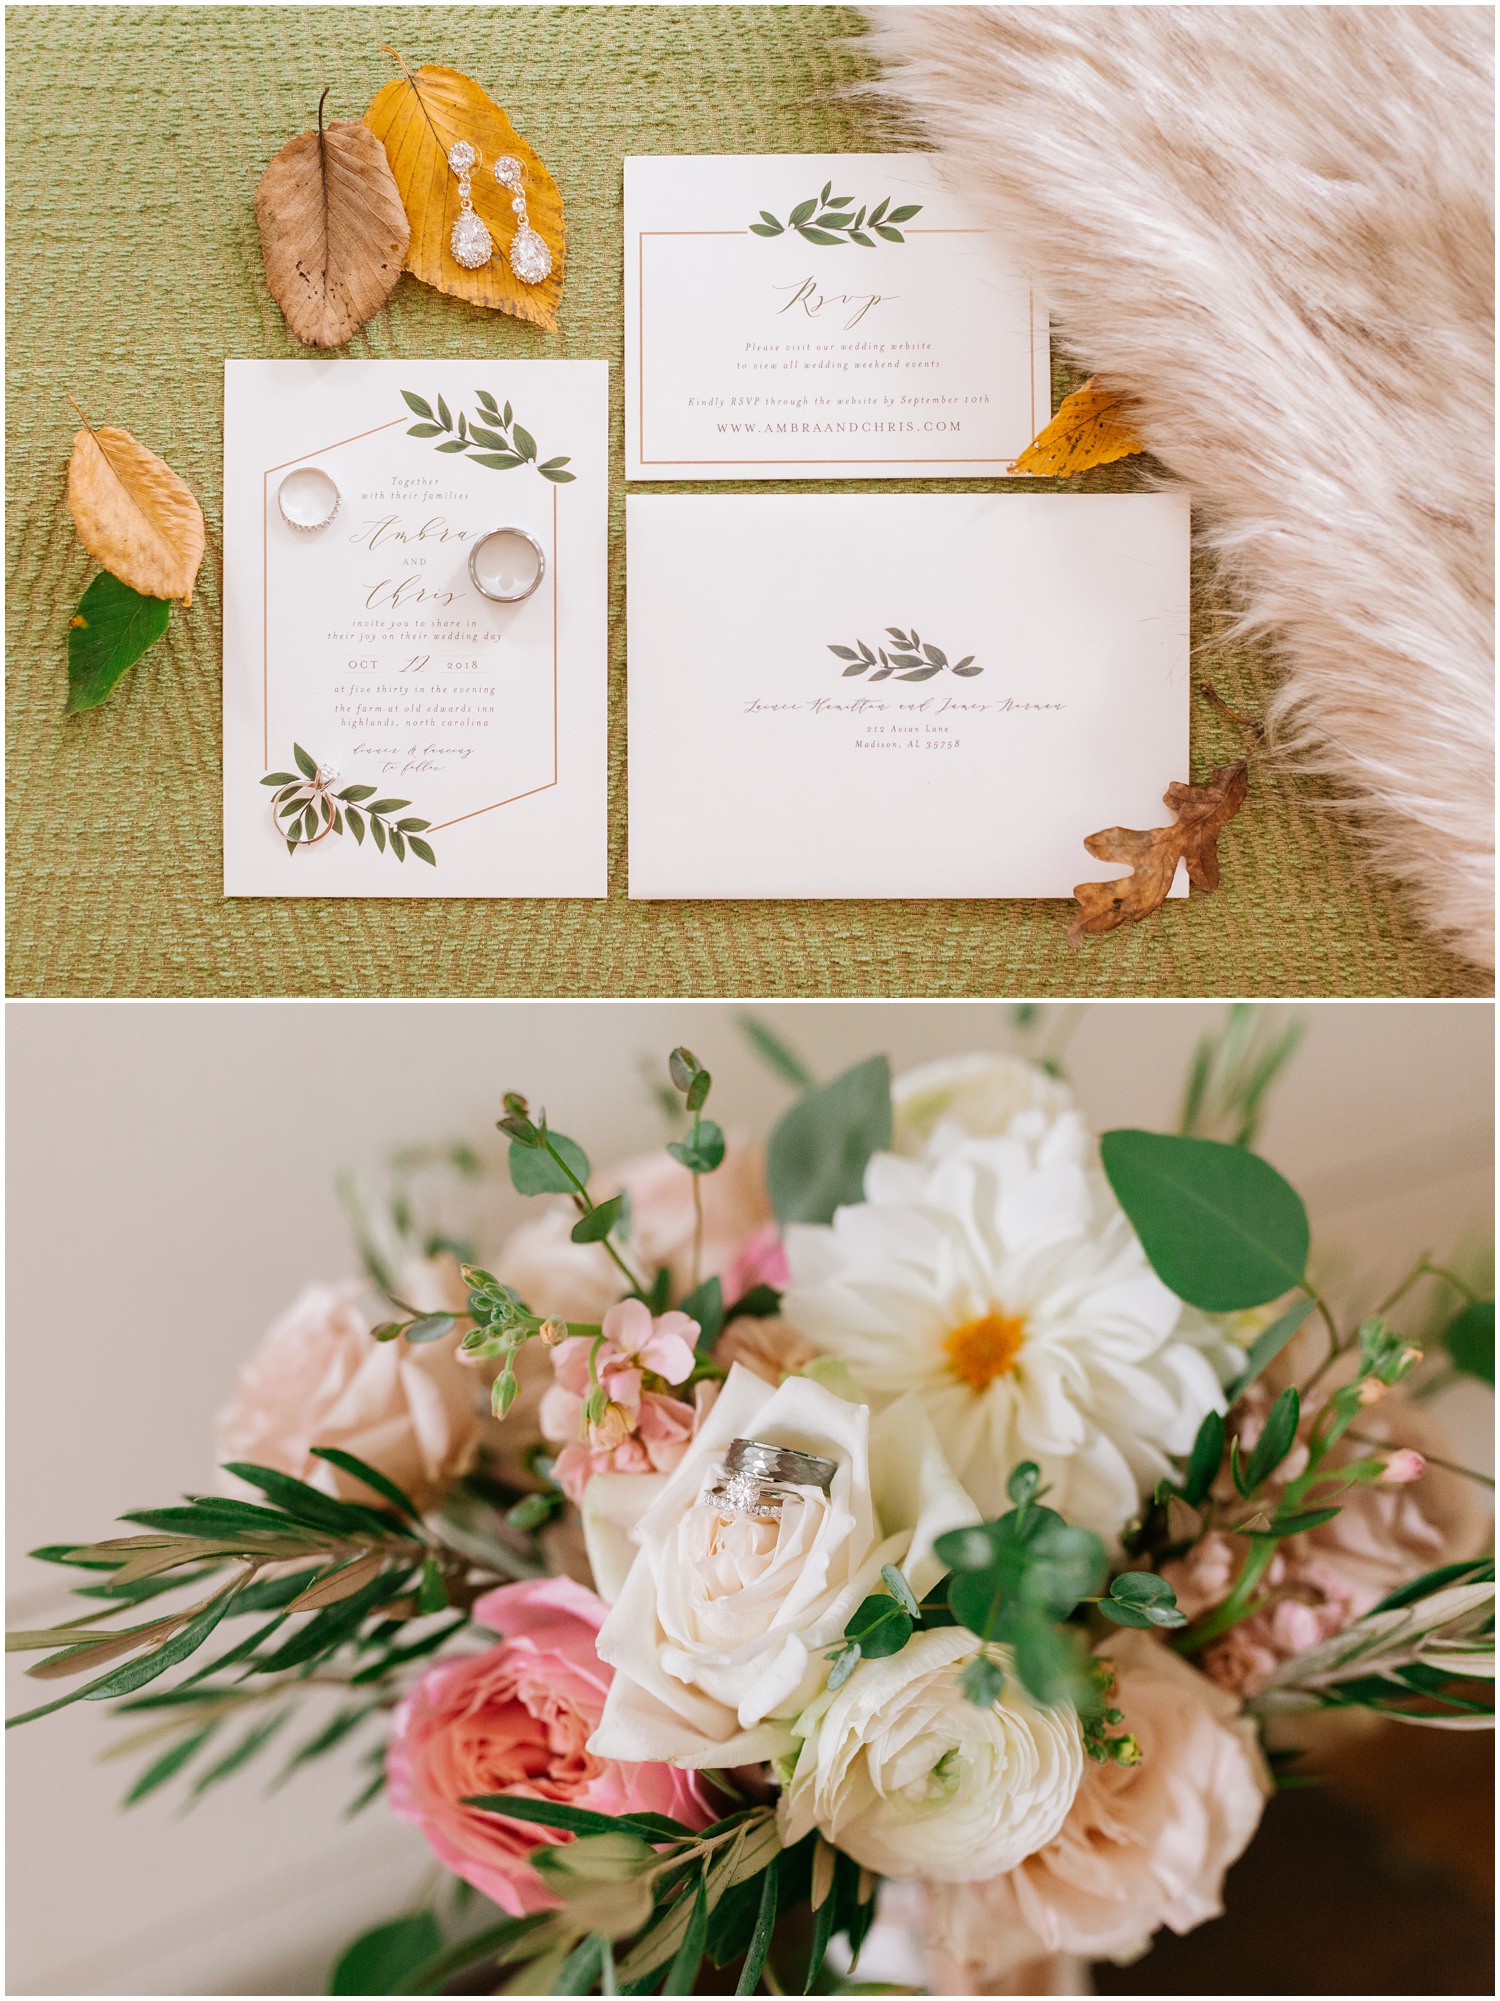 wedding invitation with fall leaves and bride's bouquet with wedding rings photographed by Chelsea Renay